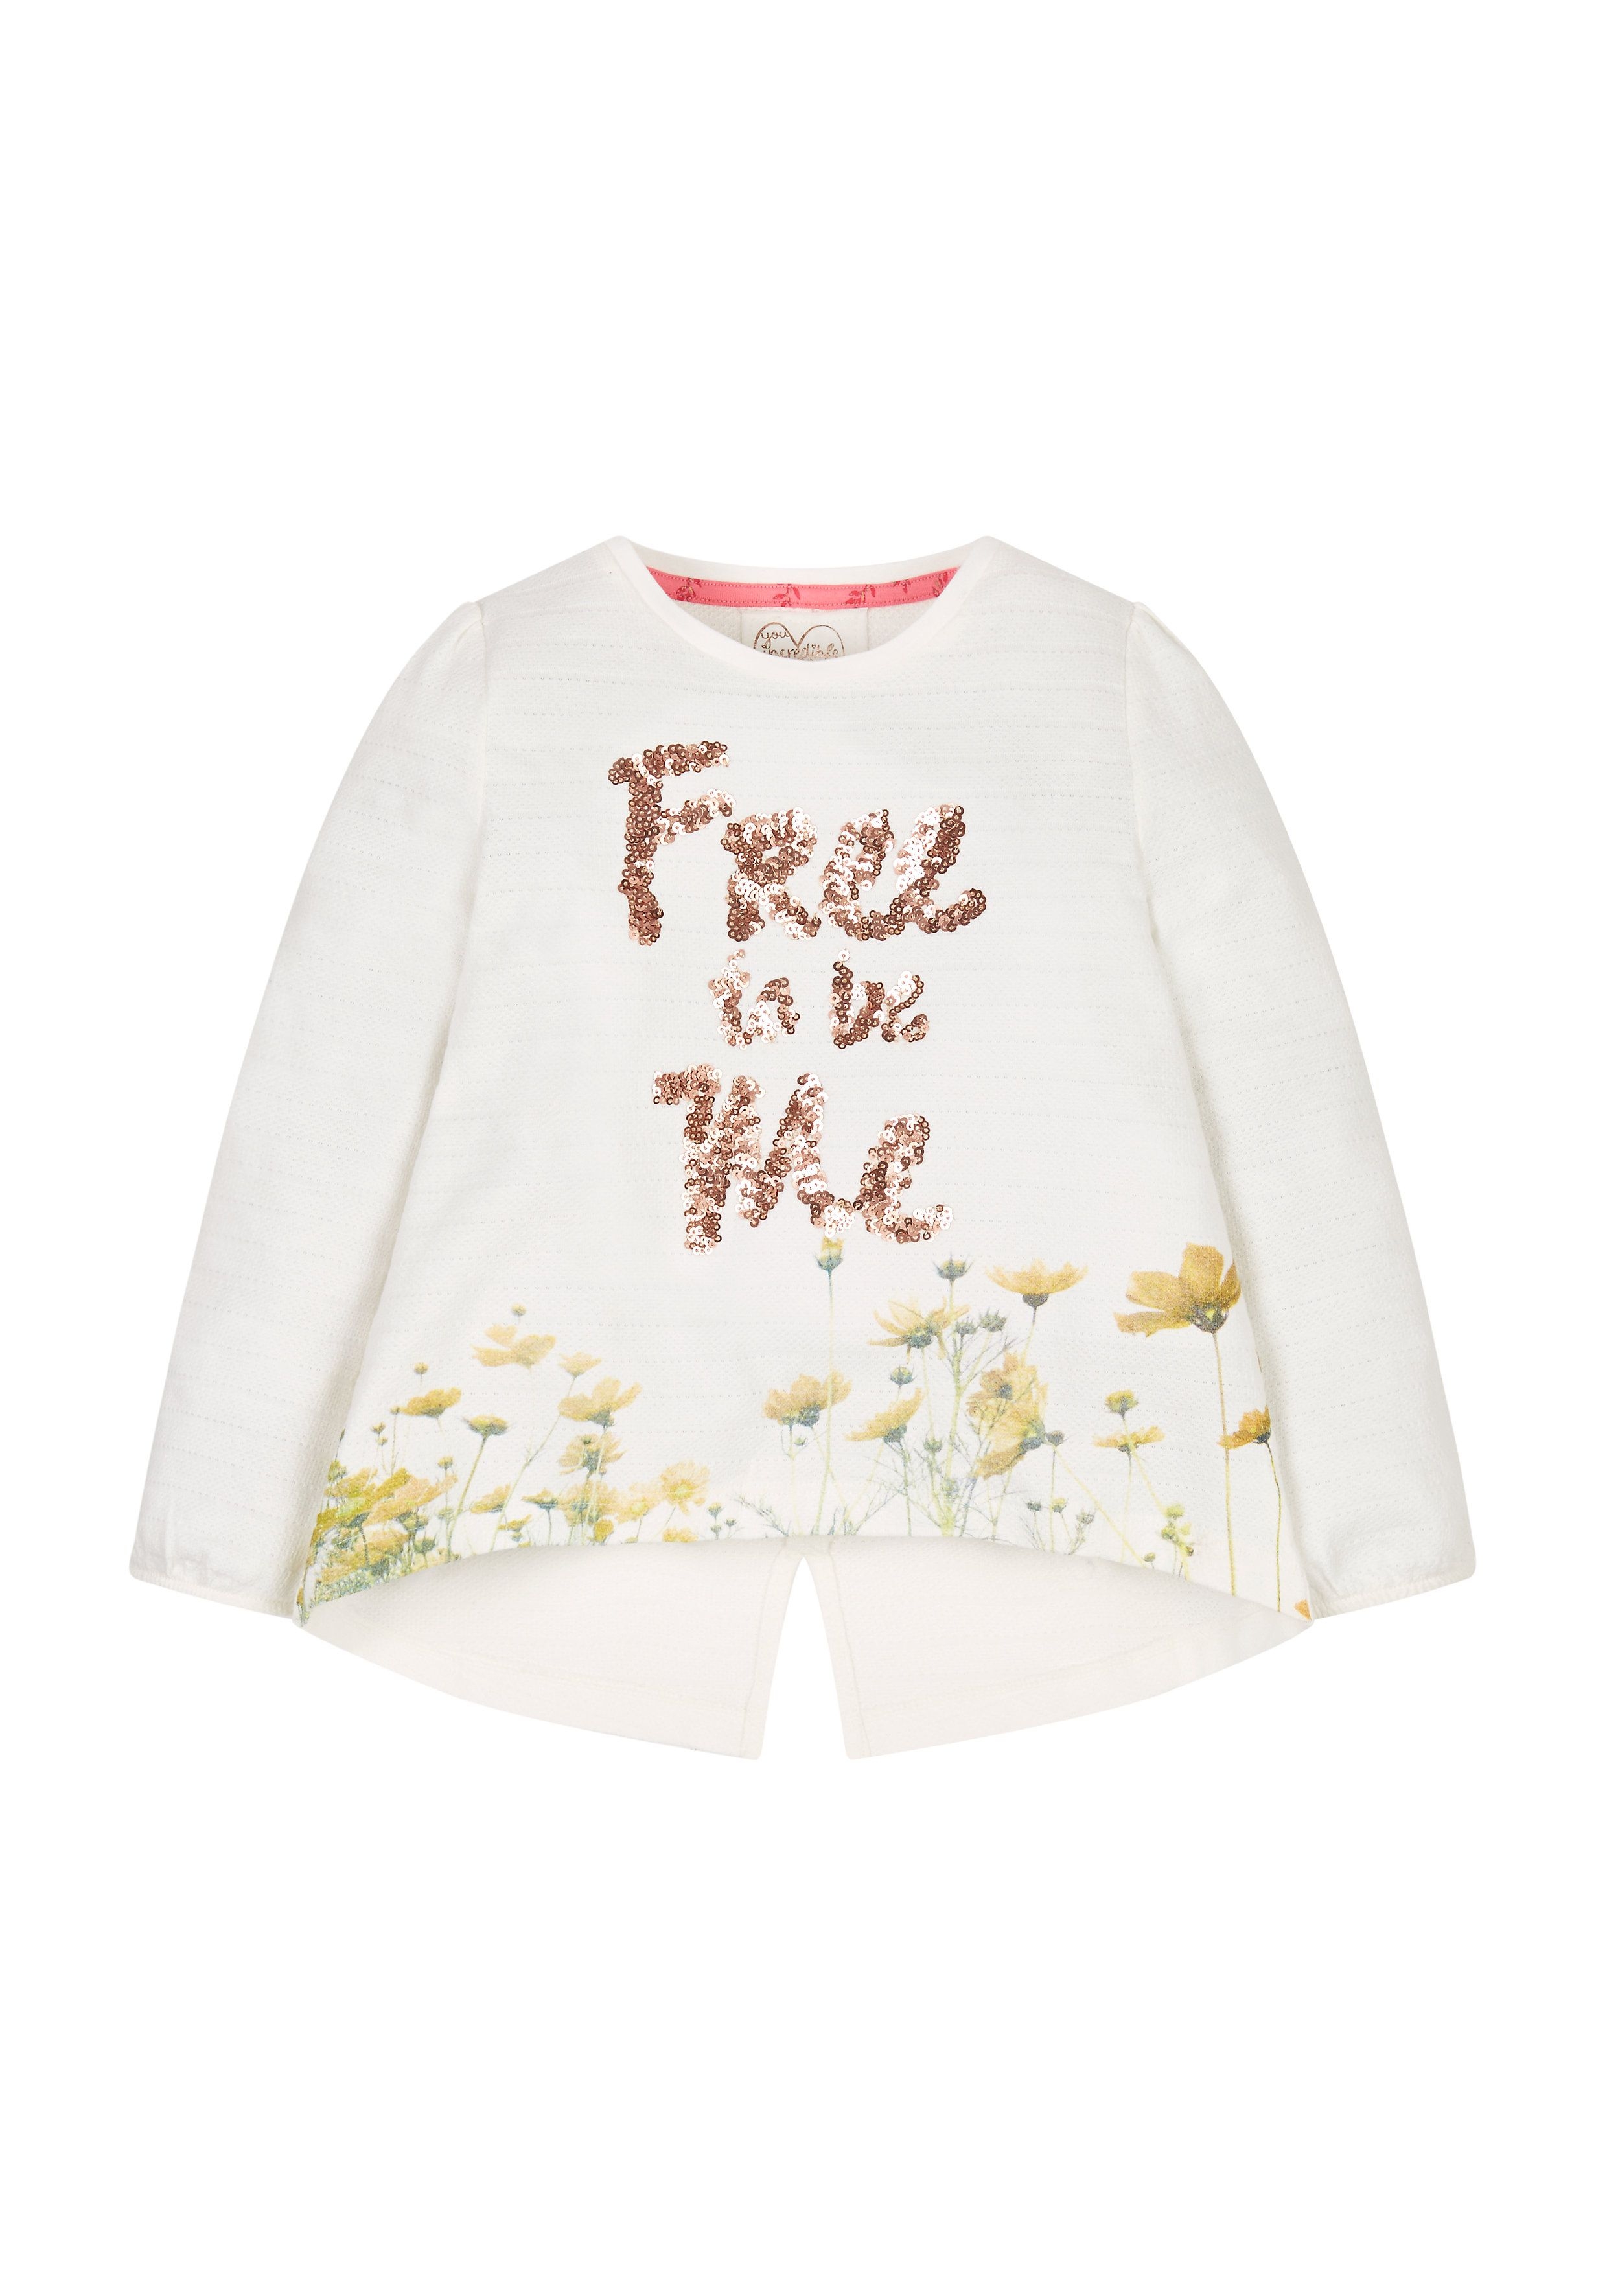 Mothercare | Free To Be Me T-Shirt